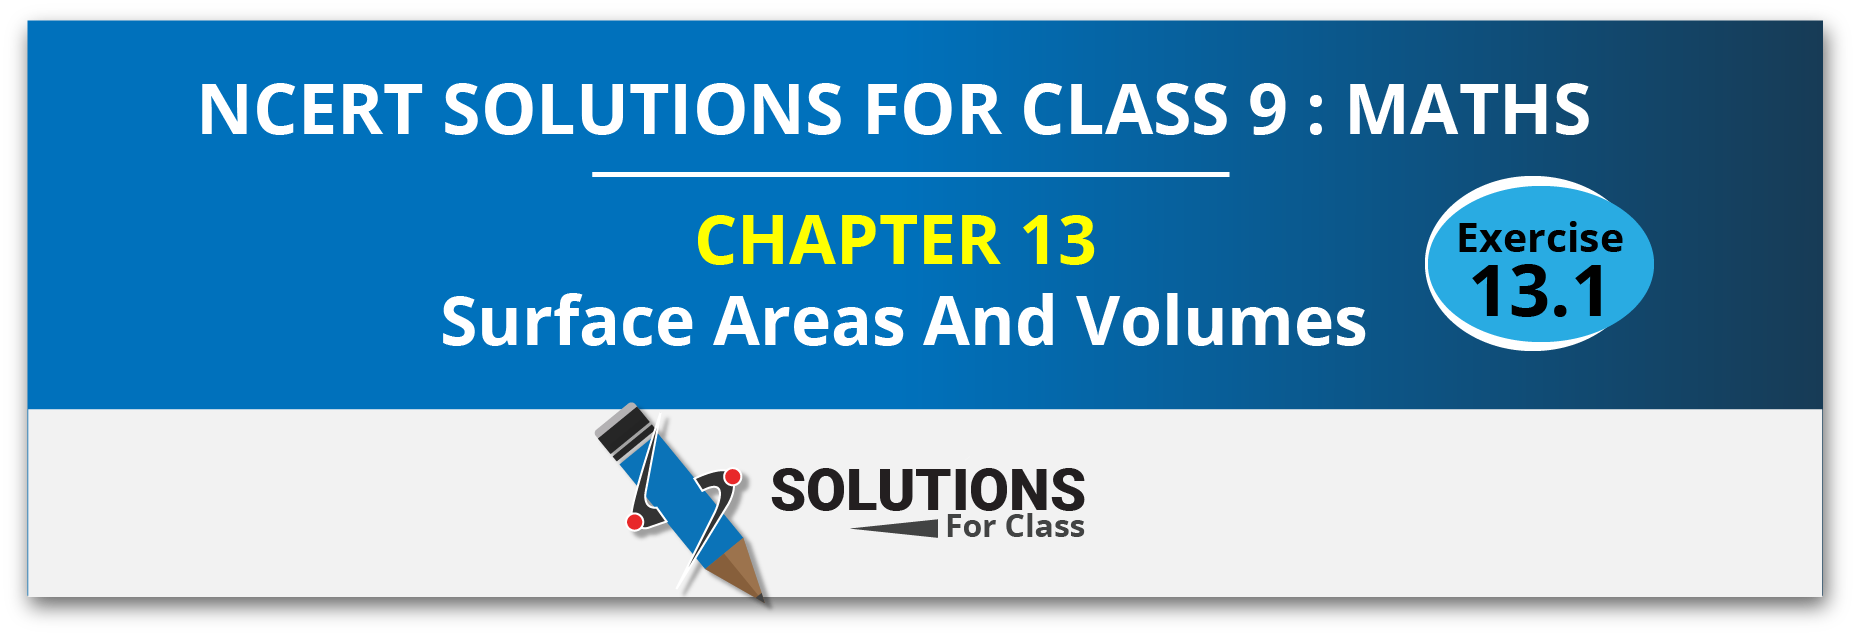 NCERT Solution For Class 9, Maths, Chapter 13, Surface Areas And Volumes, Exercise 13.1